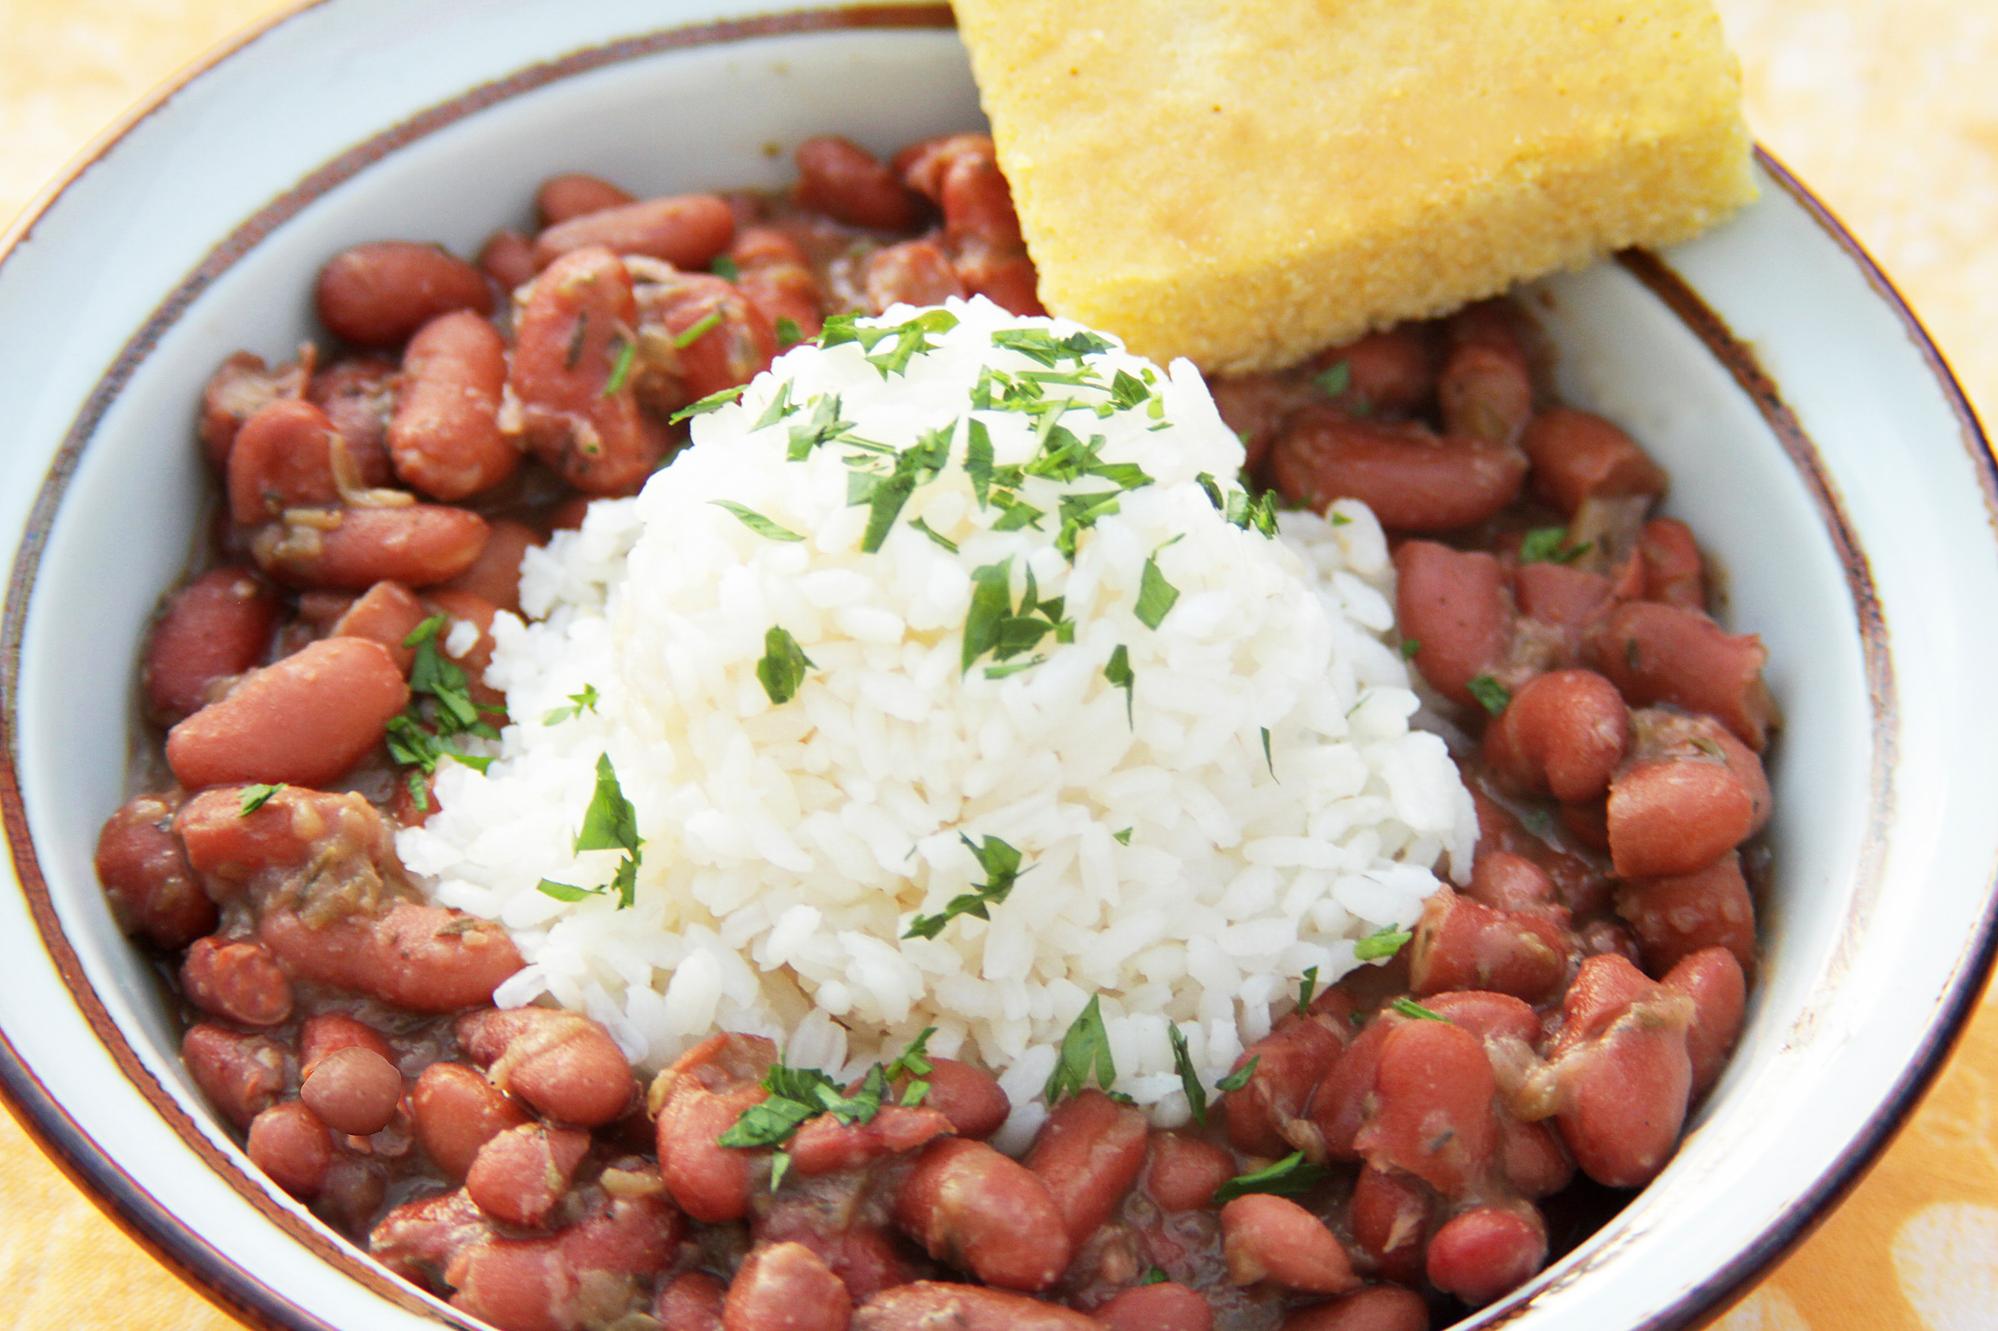  A vegetarian twist on a classic Creole dish.